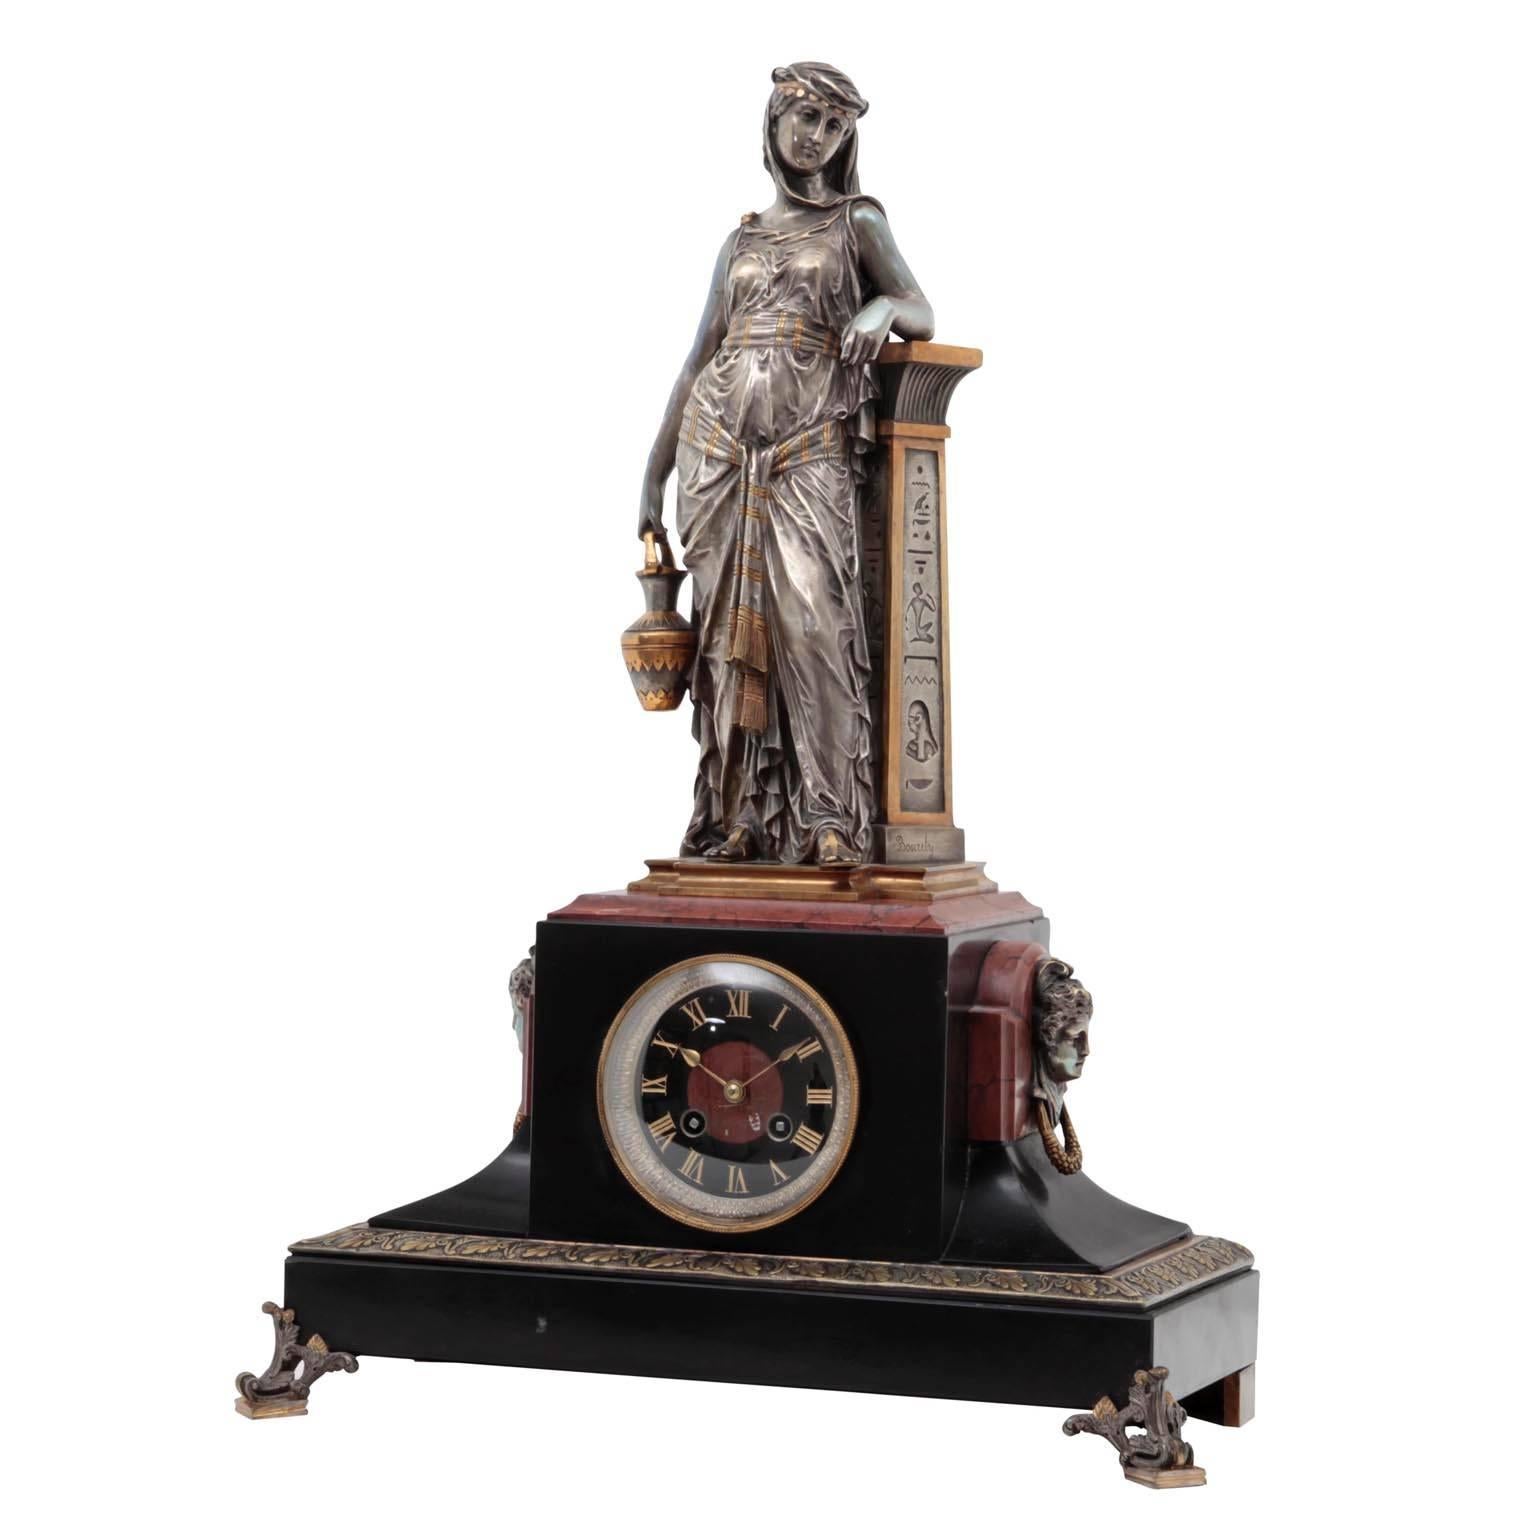 Egyptian Revival Mantel Clock, Bourety, Likely France, Late 19th Century